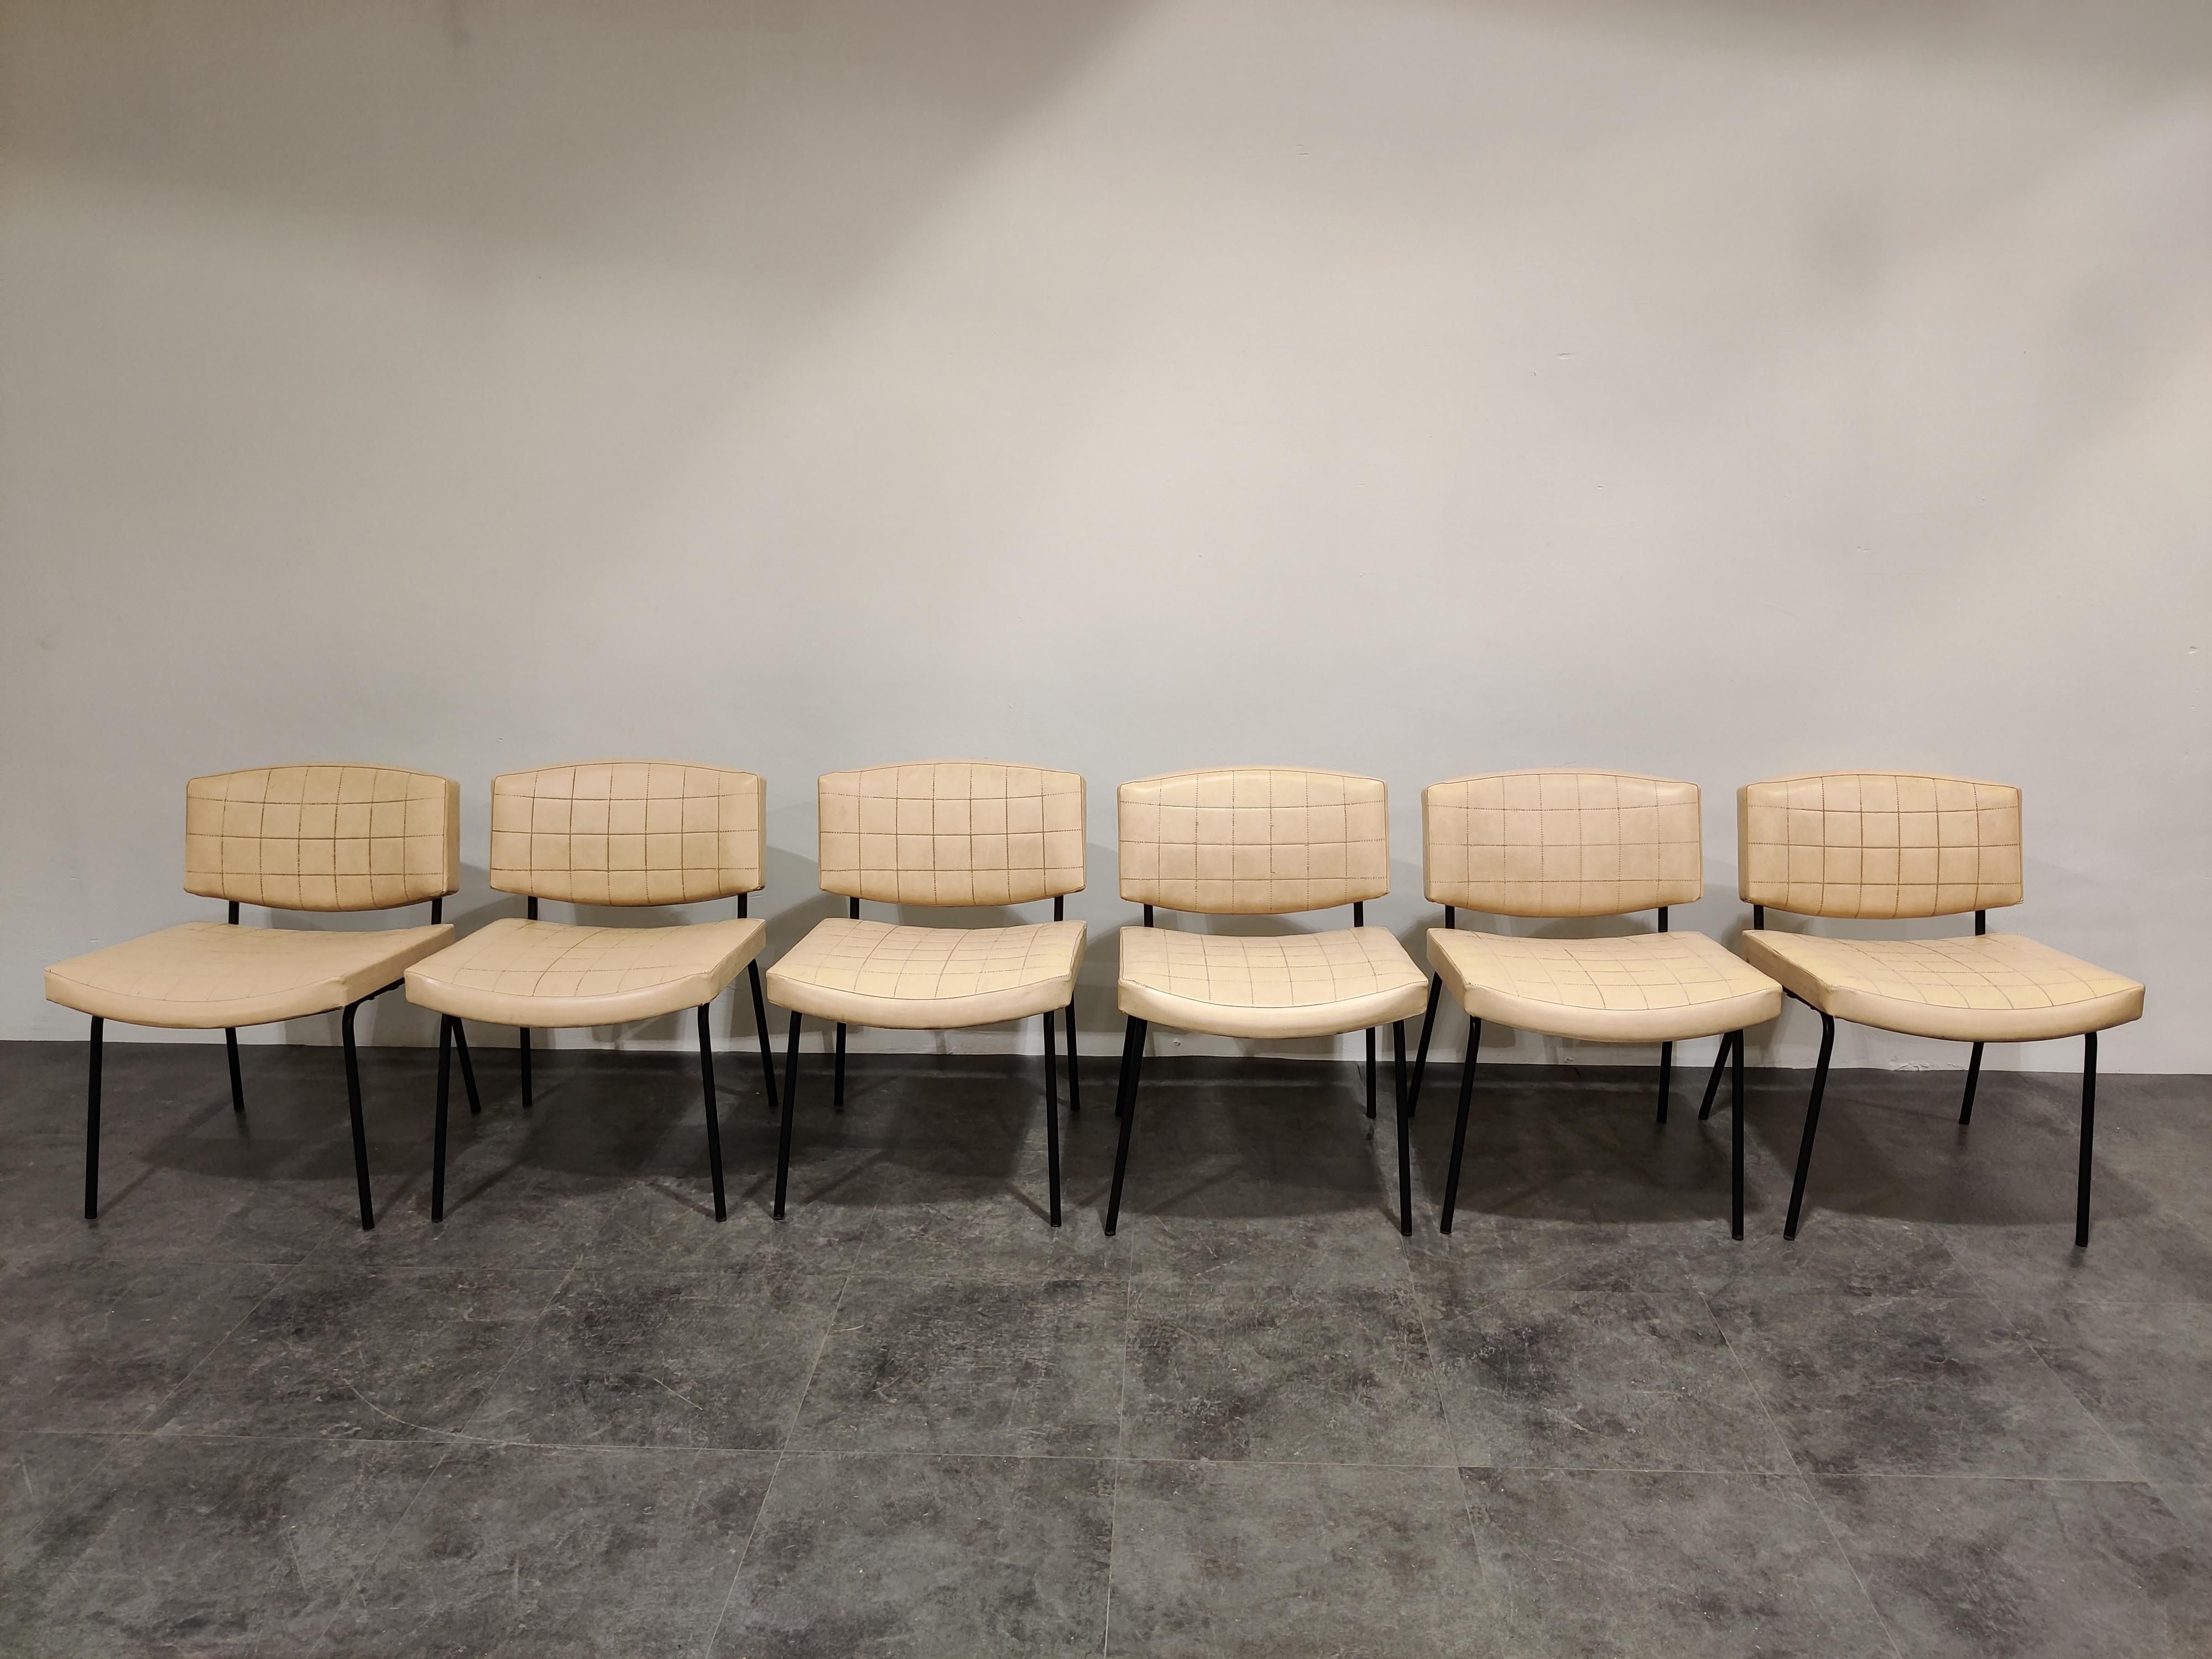 Set of 6 Mid-Century Modern 'conseil' chairs designed by Pierre Guariche for Meurop.

The chairs have a black lacquered frame and are upholstered in white leatherette or skai. (original upholstery)

The chairs are in good condition, with minor